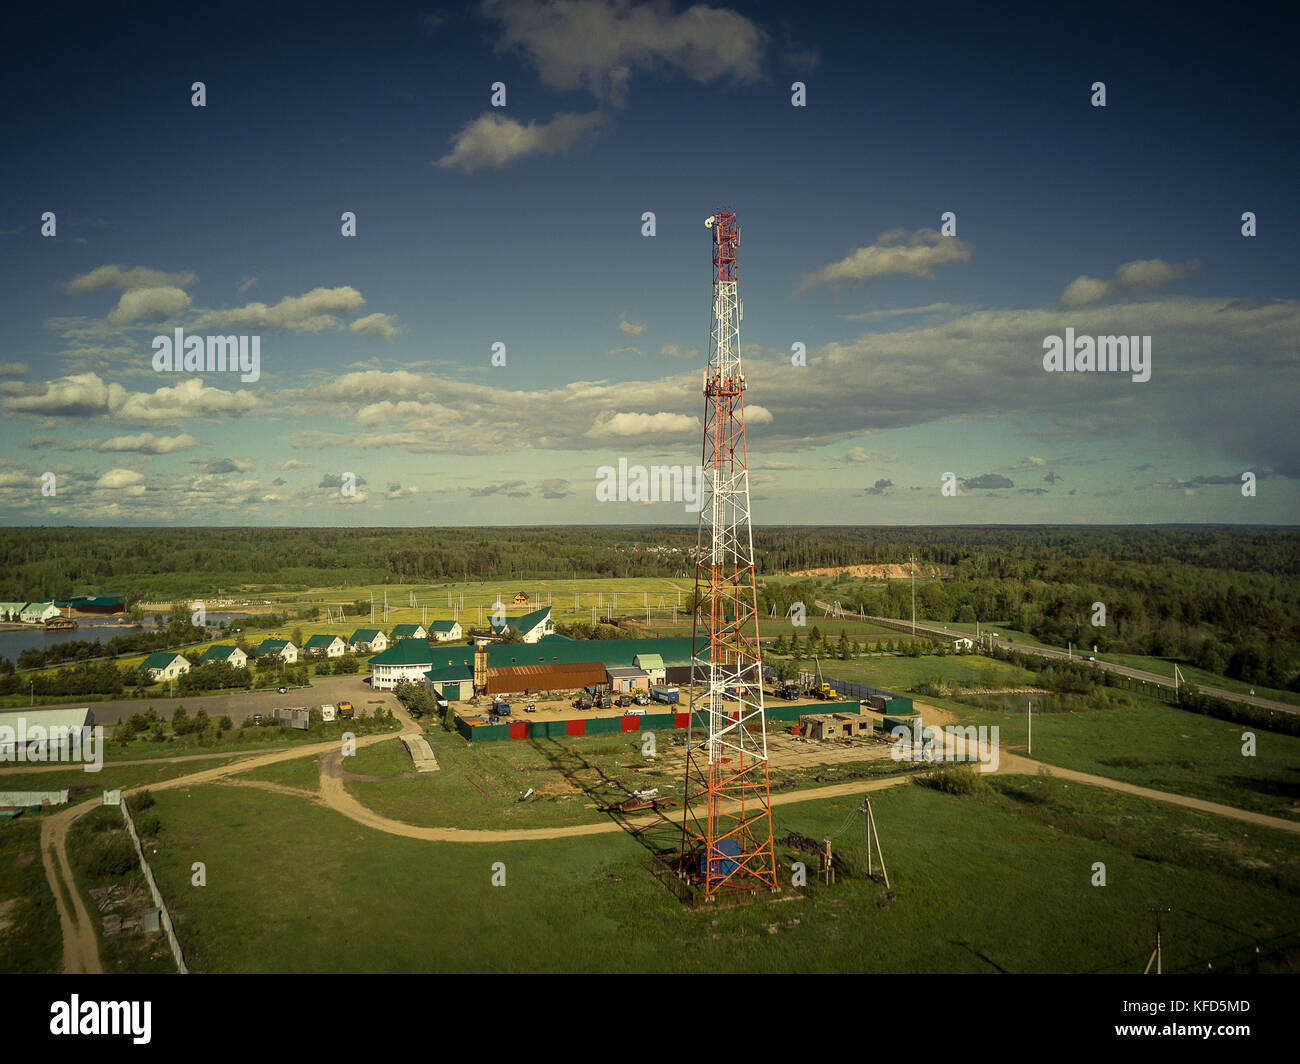 Cellular Tower near small town Stock Photo